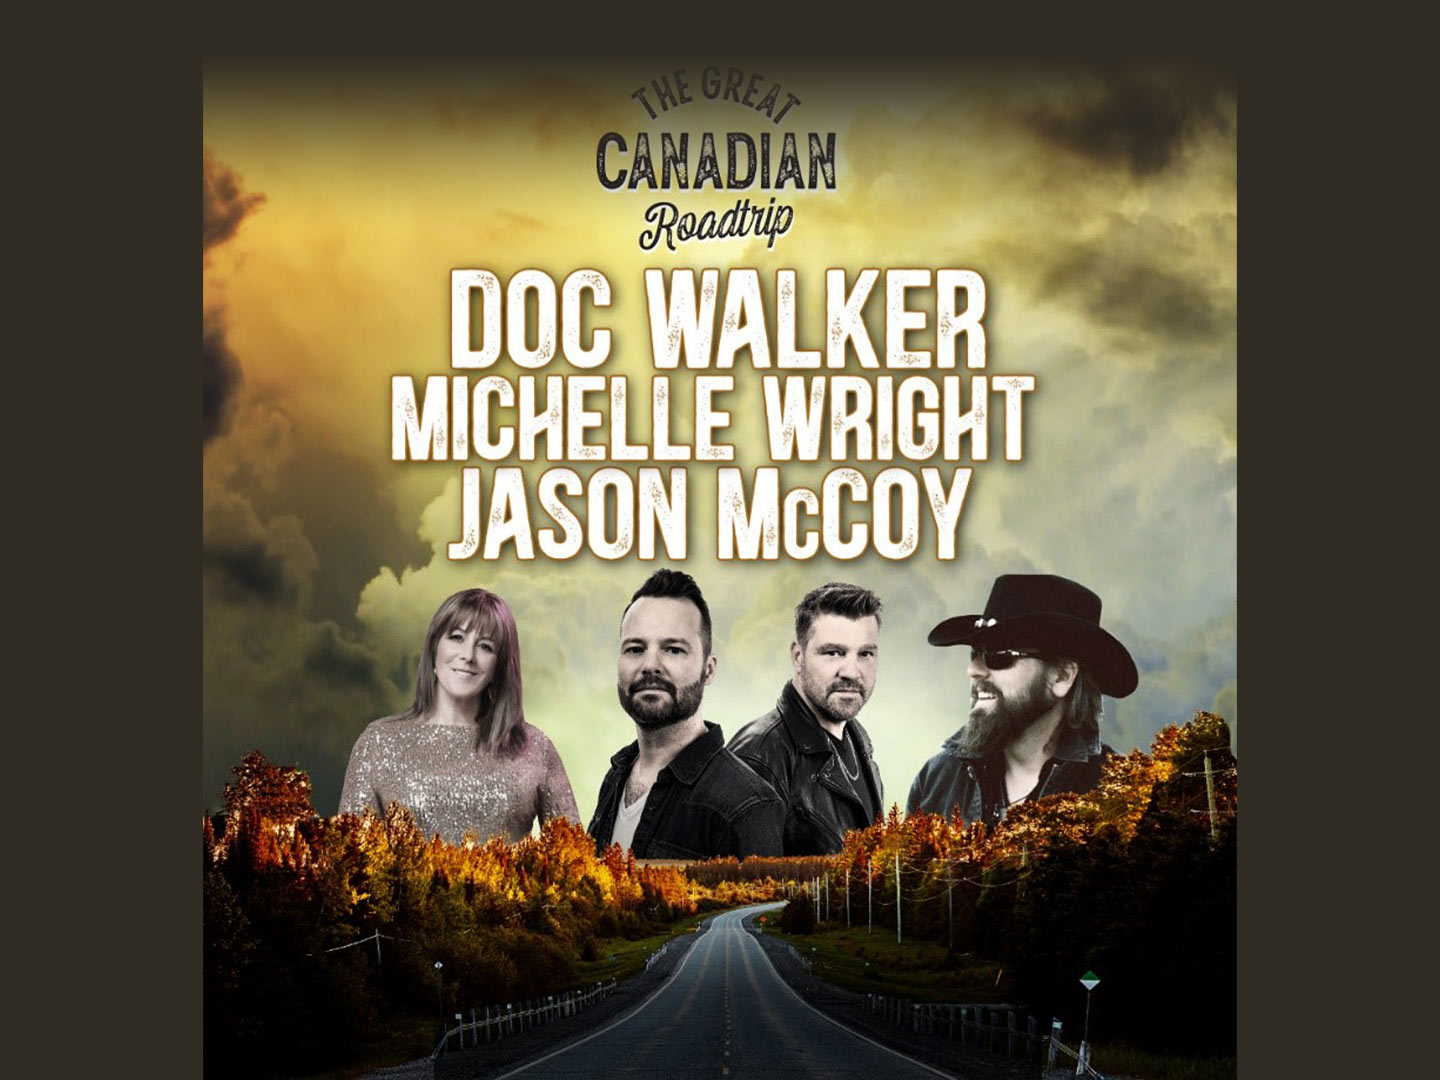 The Great Canadian Roadtrip featuring Doc Walker, Michelle Wright and Jason McCoy